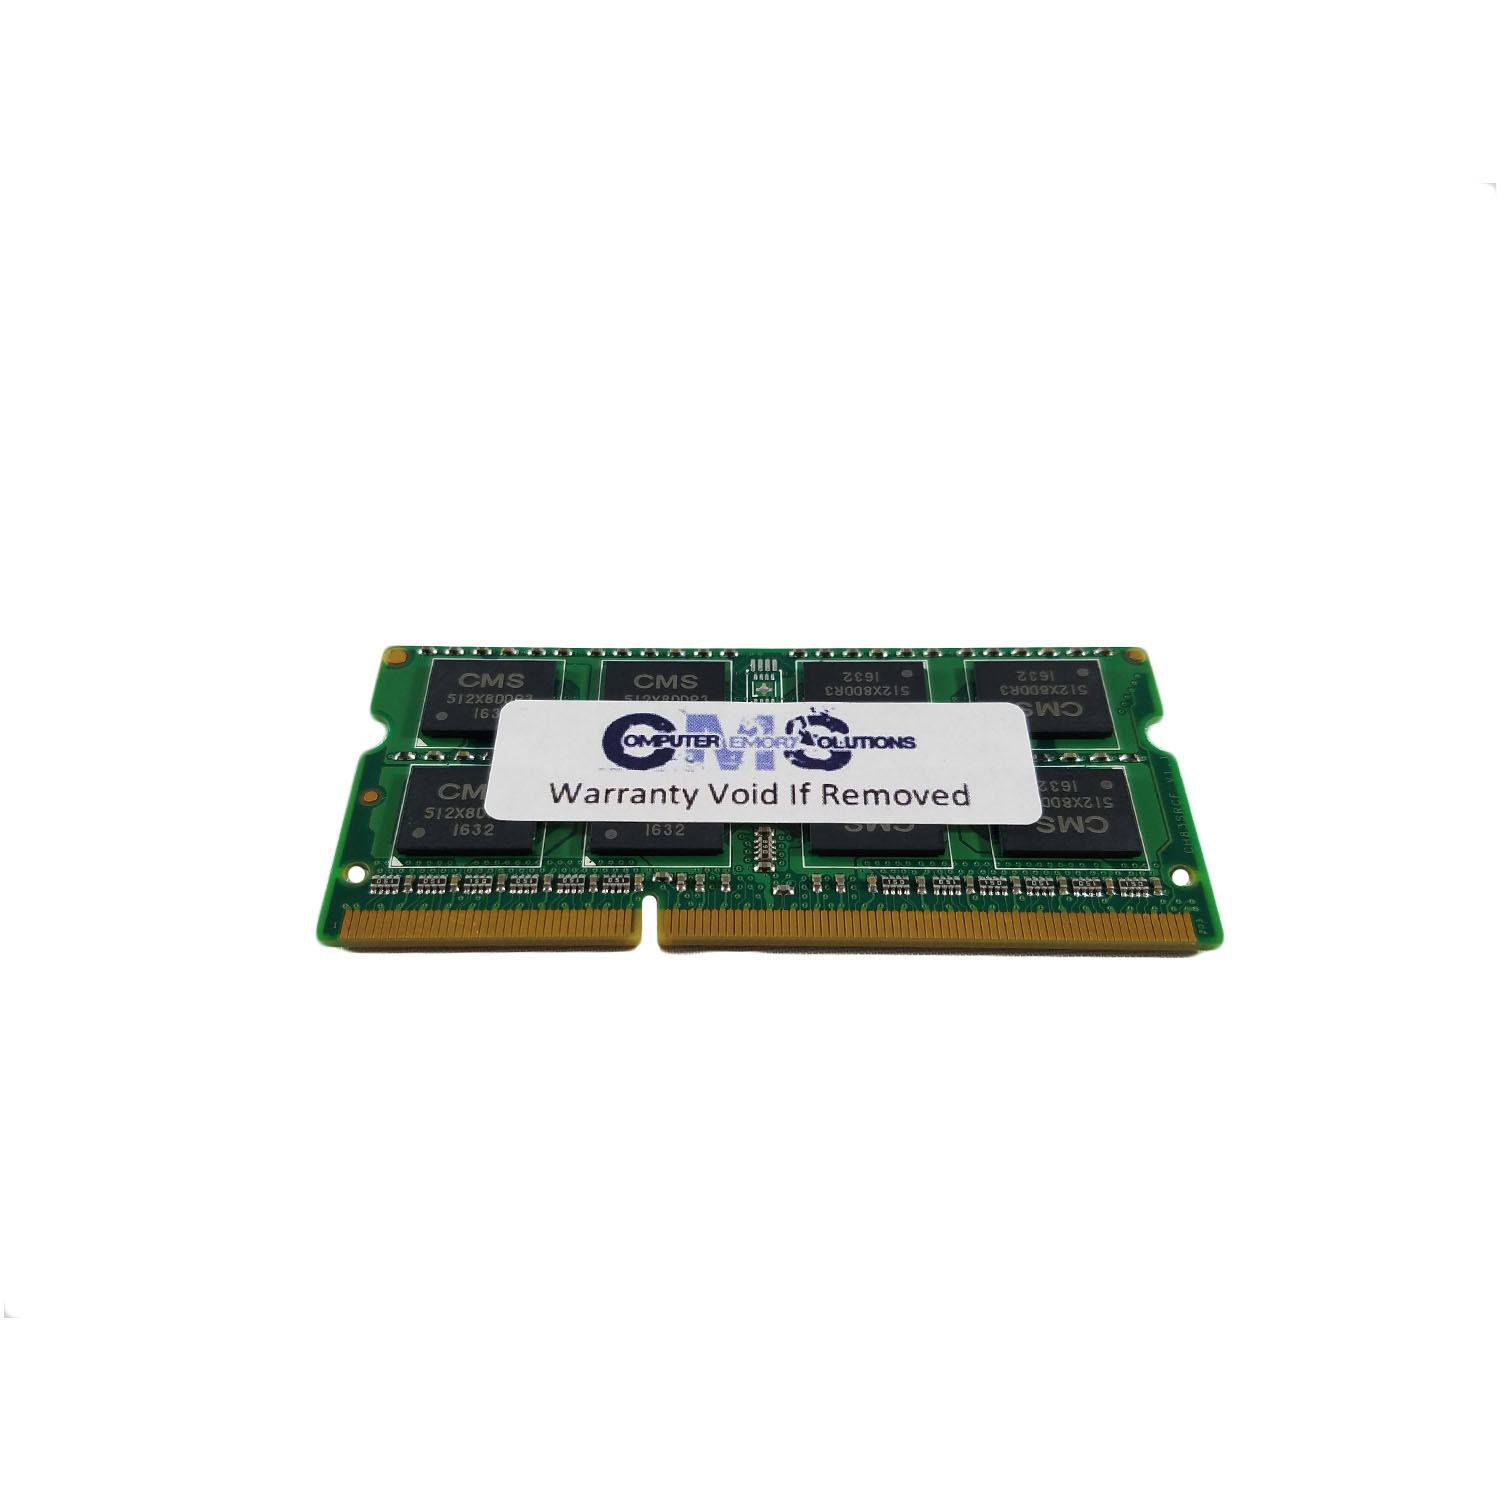 CMS 2GB (1X2GB) DDR3 8500 1066MHZ NON ECC SODIMM Memory Ram Compatible with Asus/Asmobile Eee Pc X101Ch-Eu17-Wt 10.1" Netbook - B123 - image 2 of 3